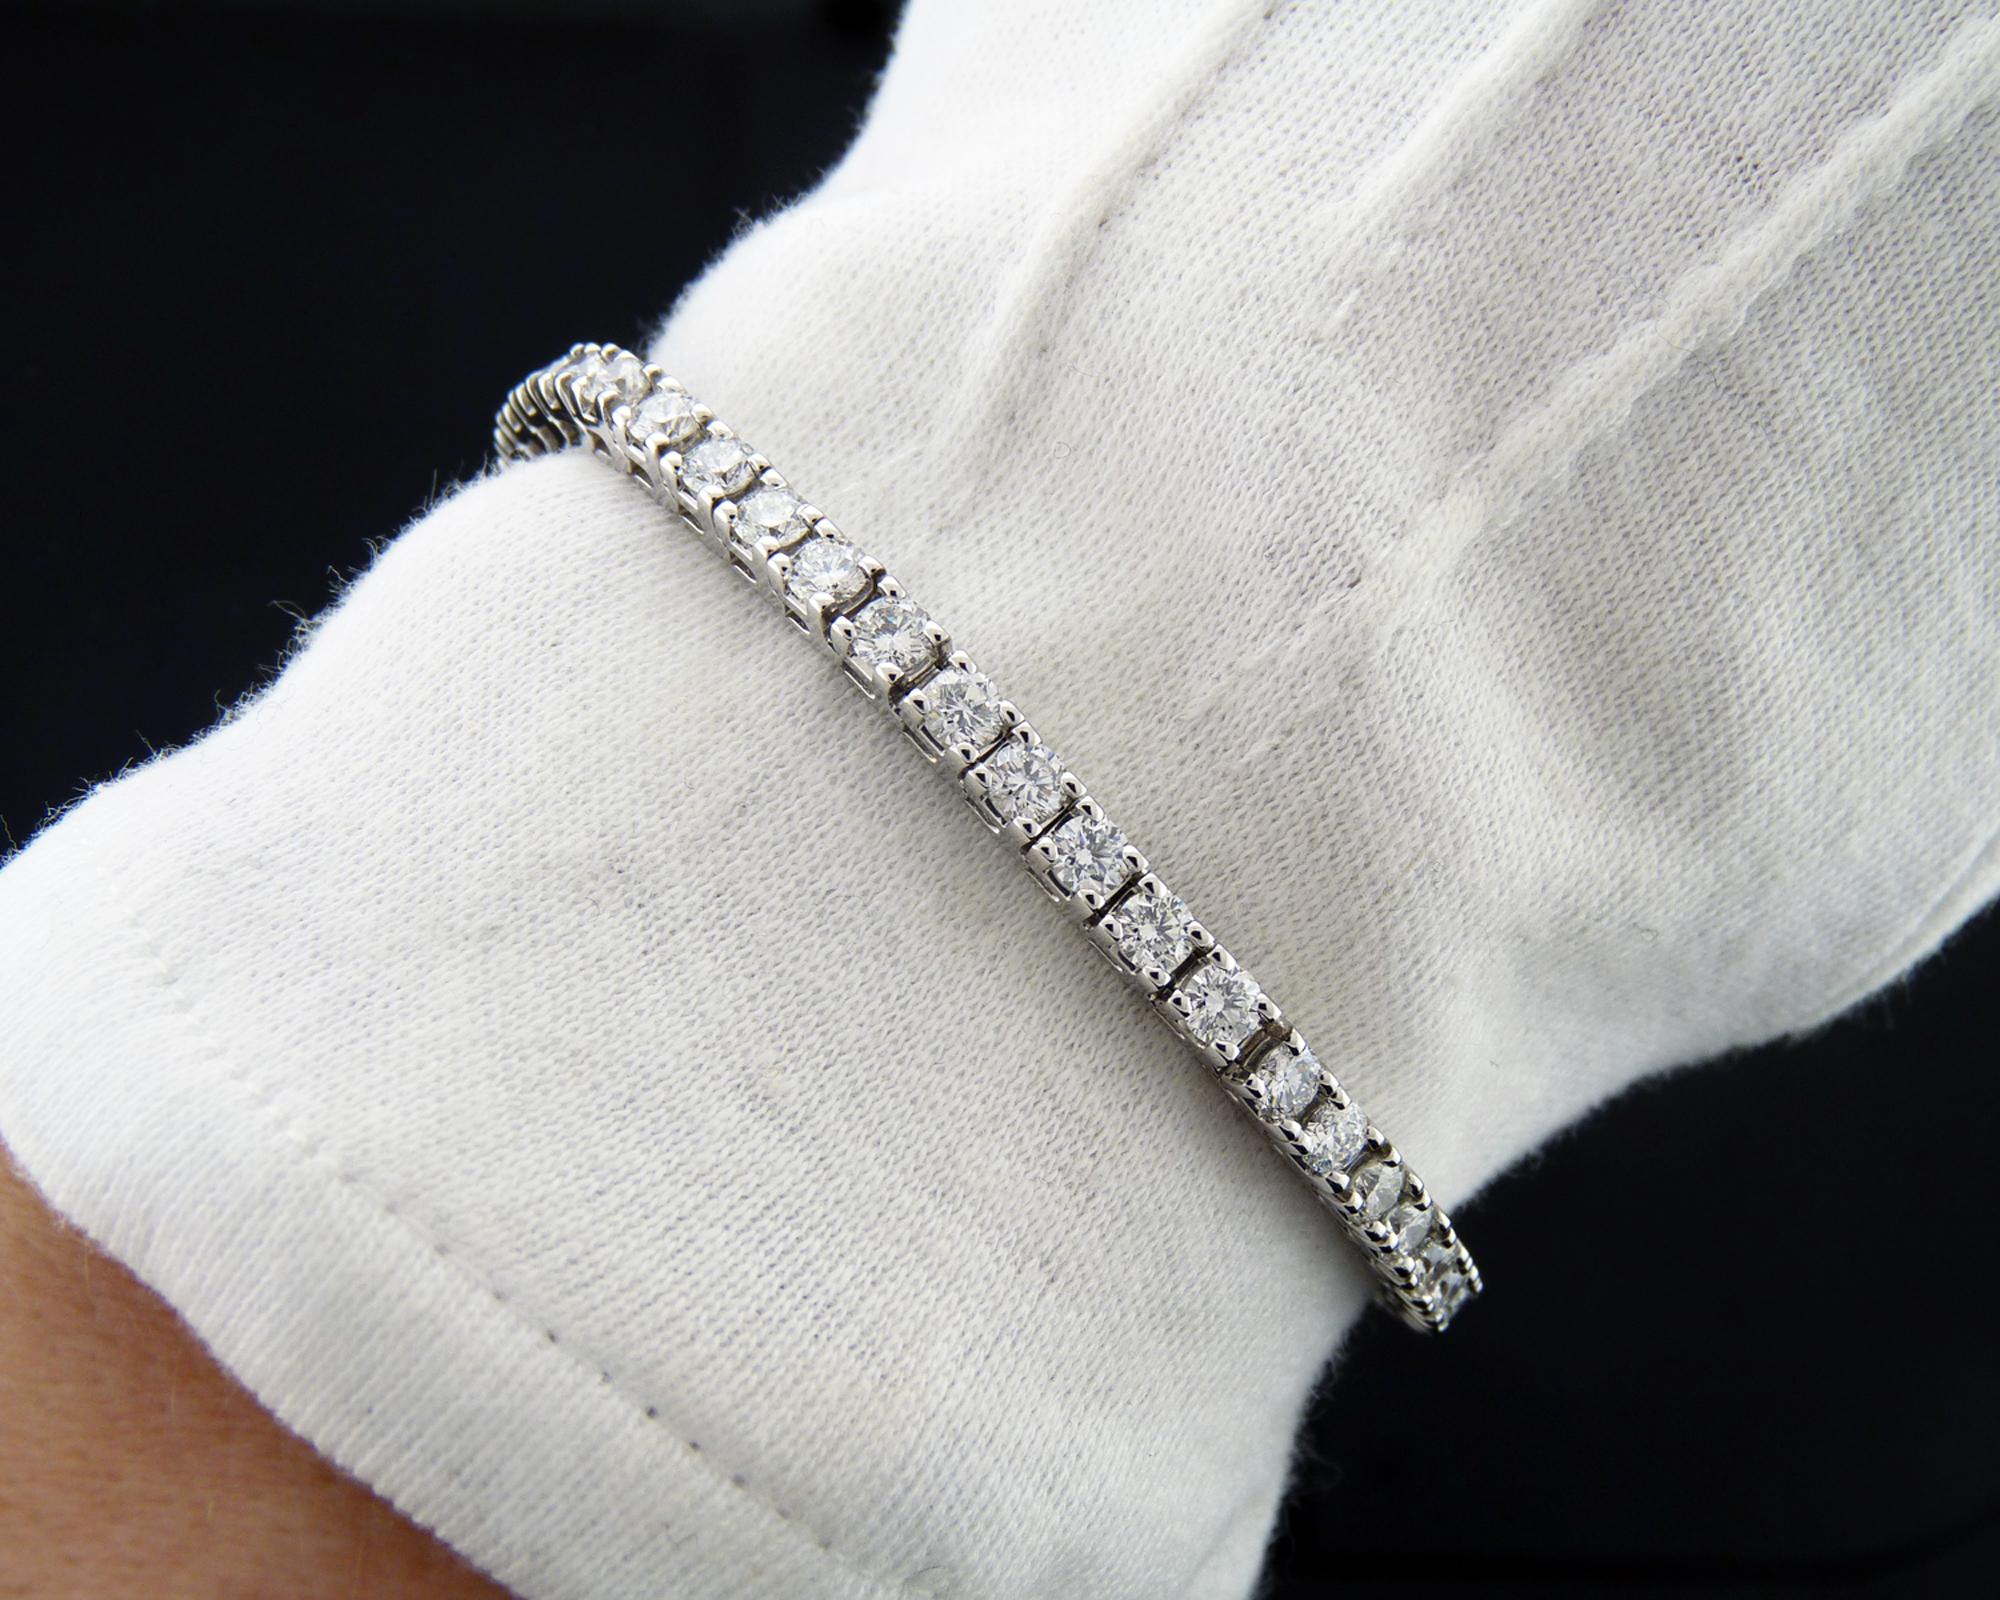 A classy tennis bracelet set with 46 round diamonds weighing a total of 6.9 carats (0.15ct each).
Diamonds are estimated as G-H color, VS-SI clarity.
4-prong setting in 14k white gold.
Gross weight: 17.42 gram.
Length: 7.13 inches.
Width:  0.47